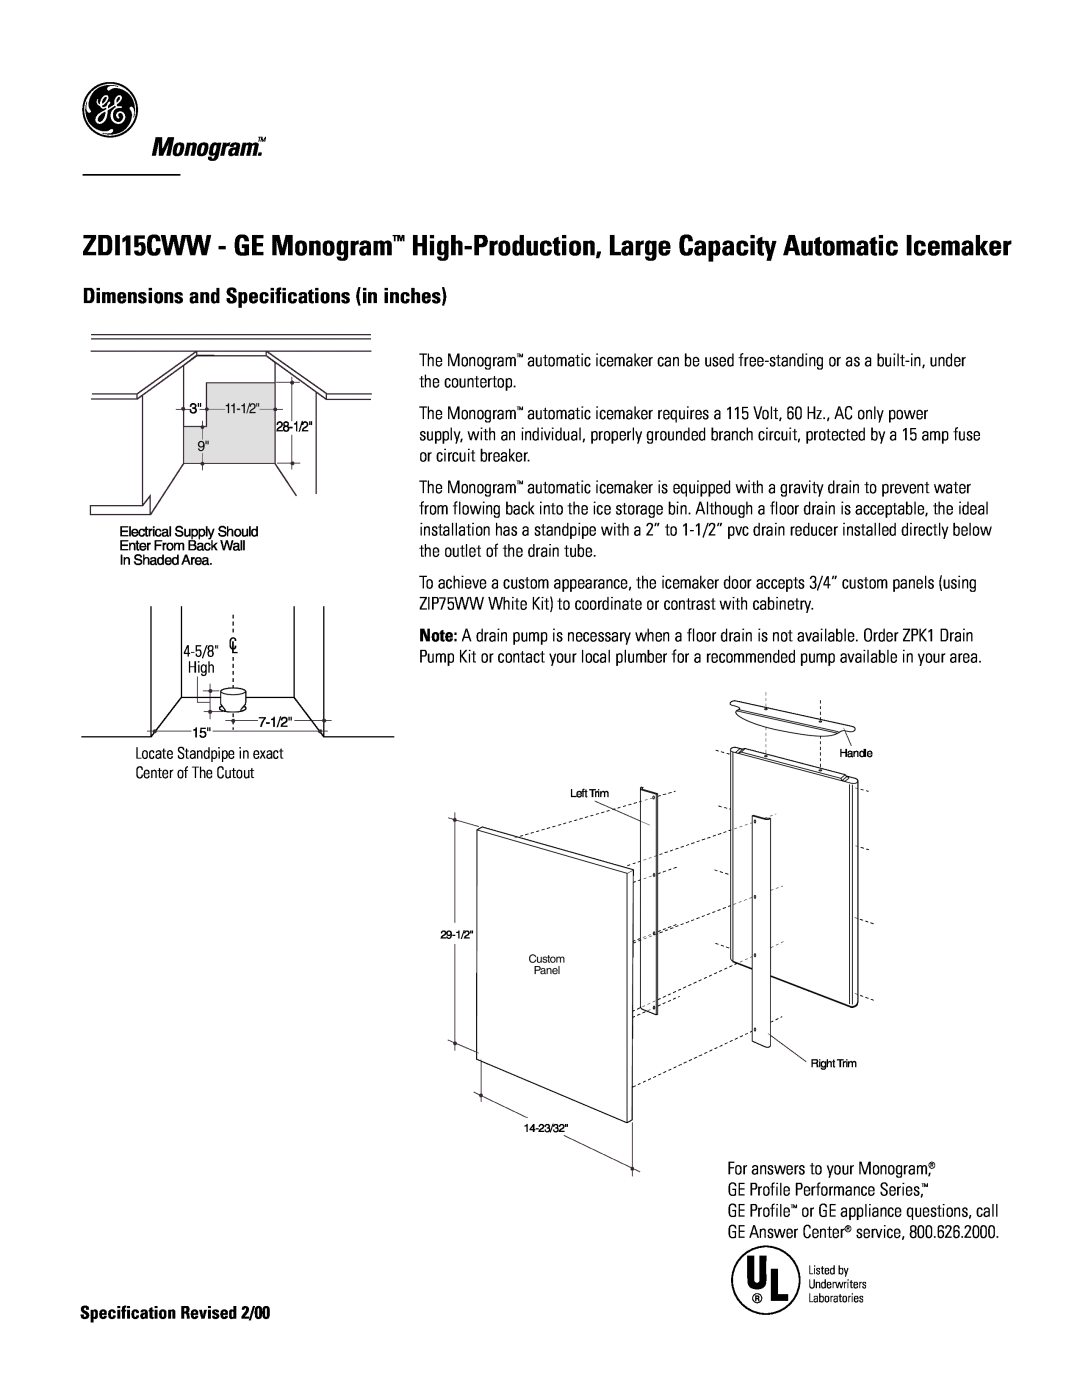 GE Monogram ZDI15CWW Monogram, Dimensions and Specifications in inches, Specification Revised 2/00, 4-5/8 High, 7-1/2 